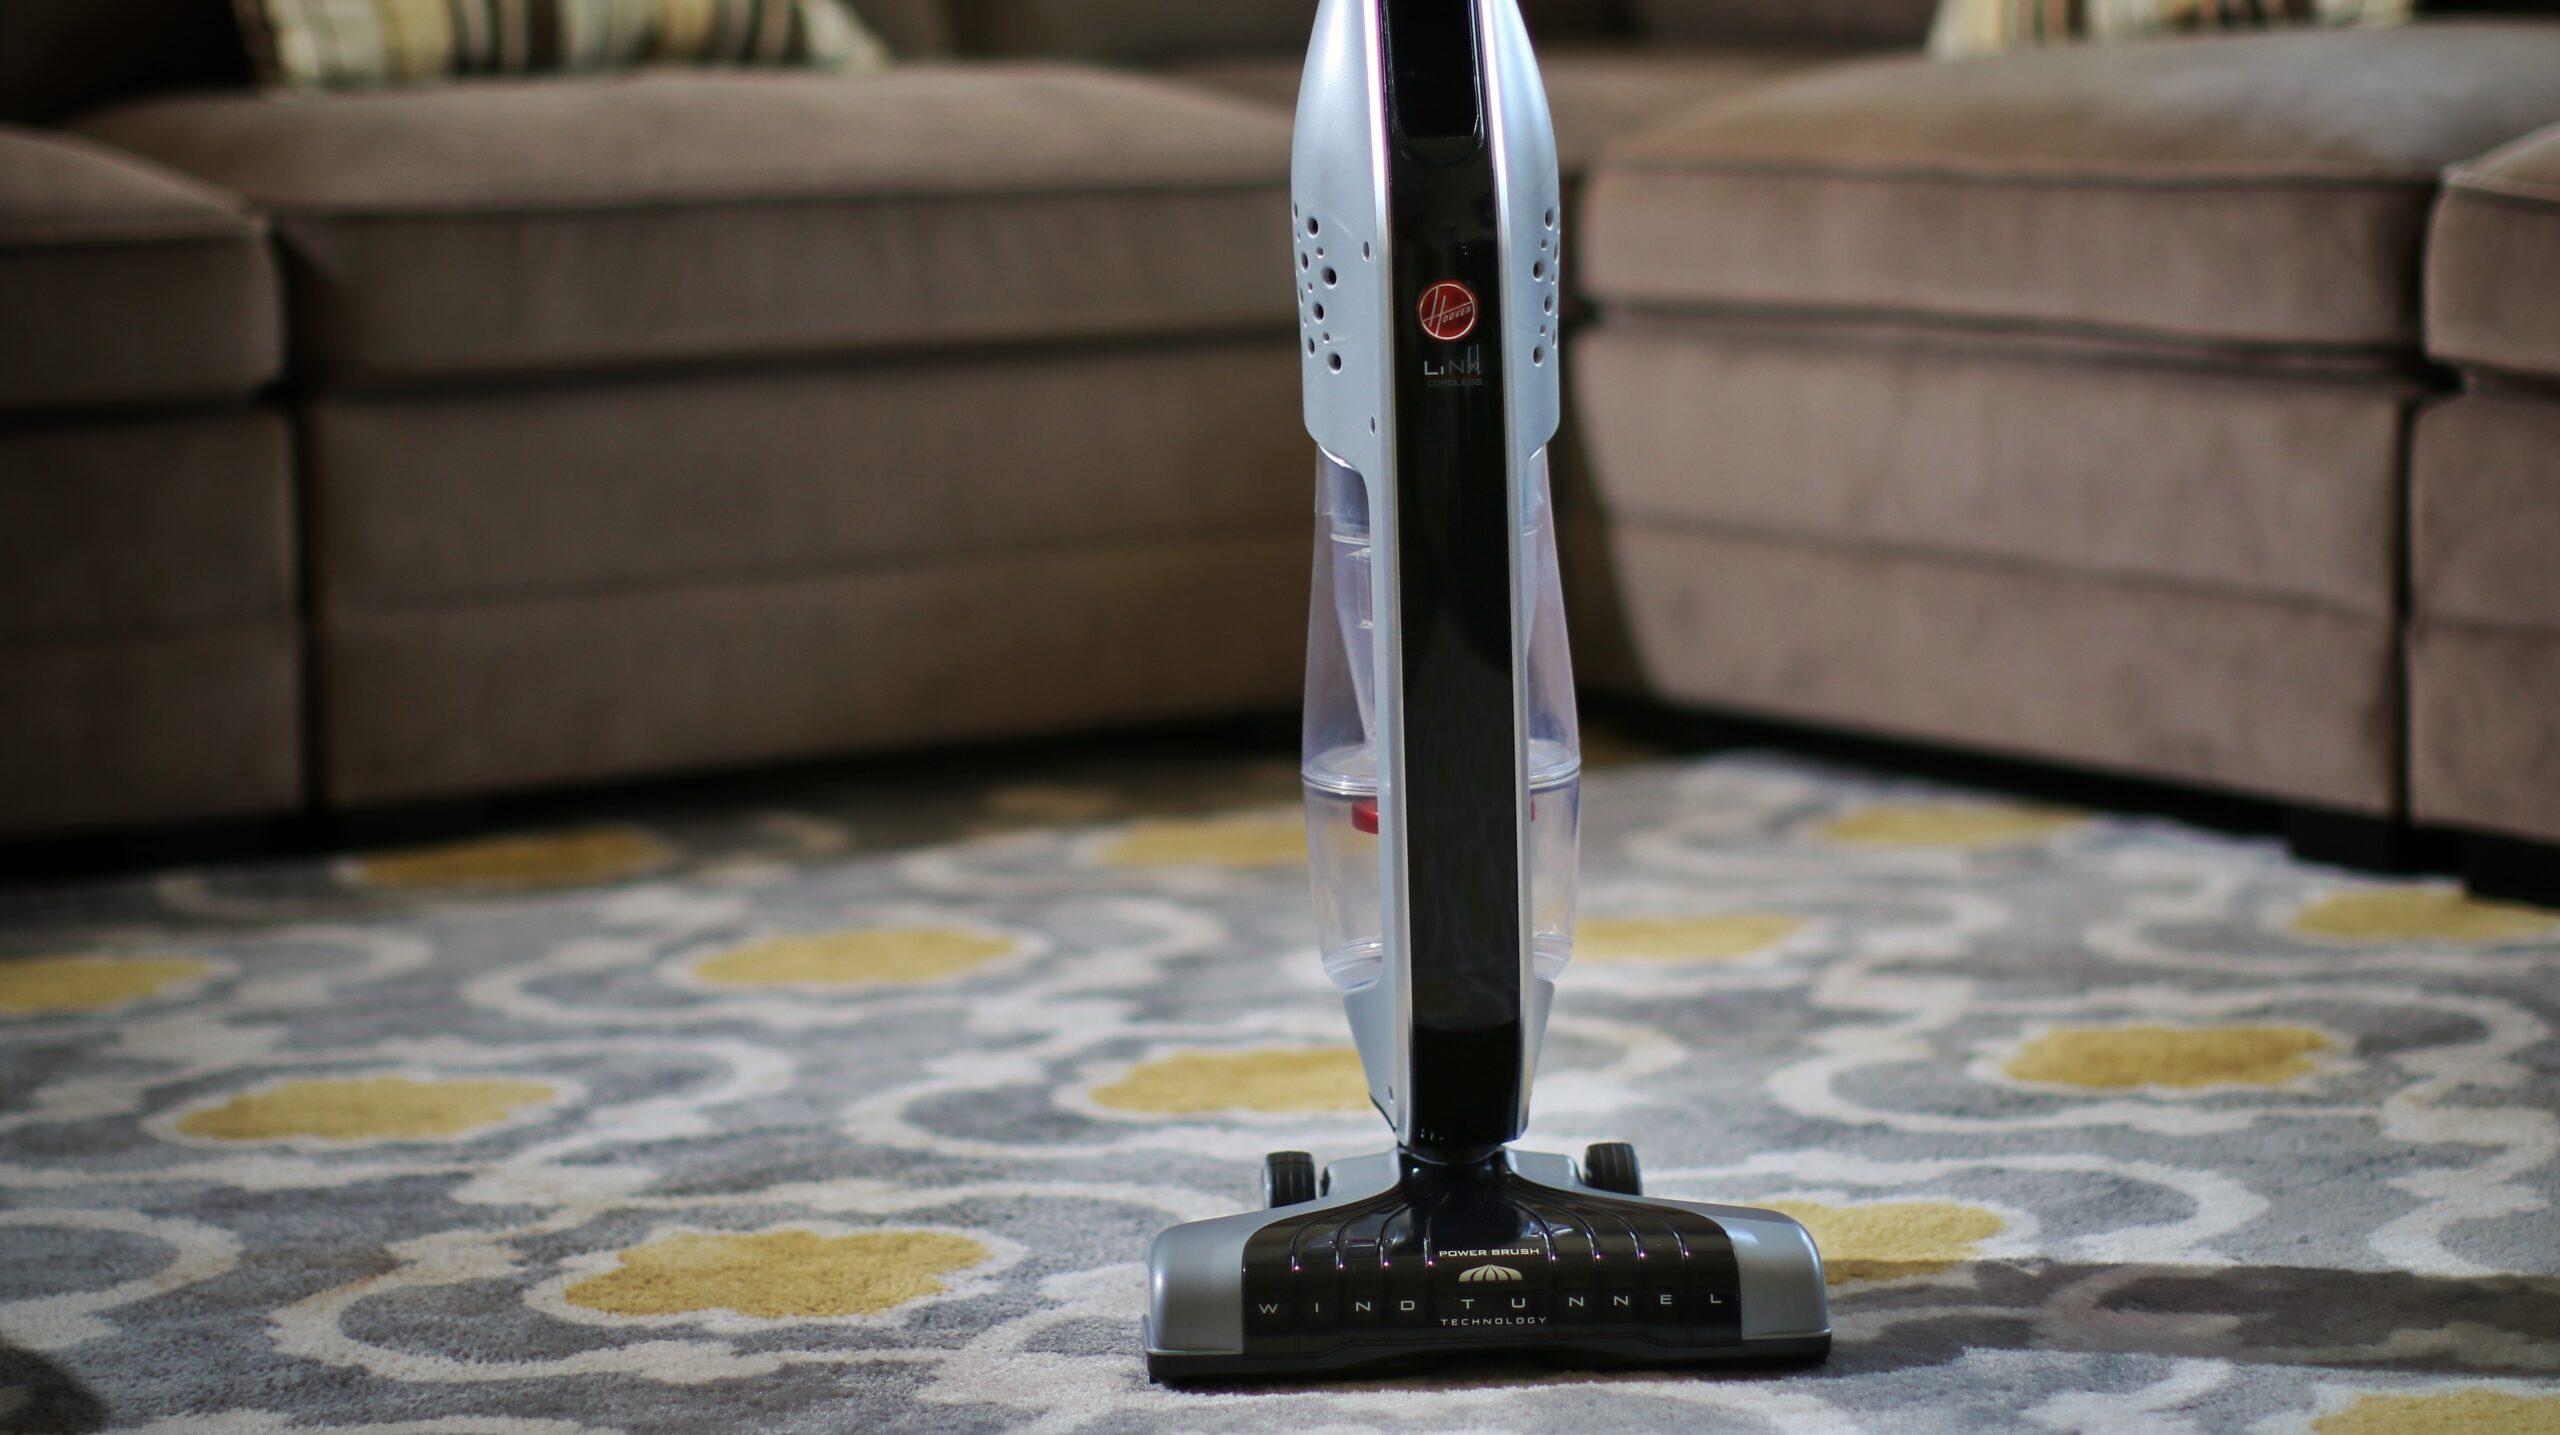 A Hoover vacuum cleaner upright on a carpeted floor.